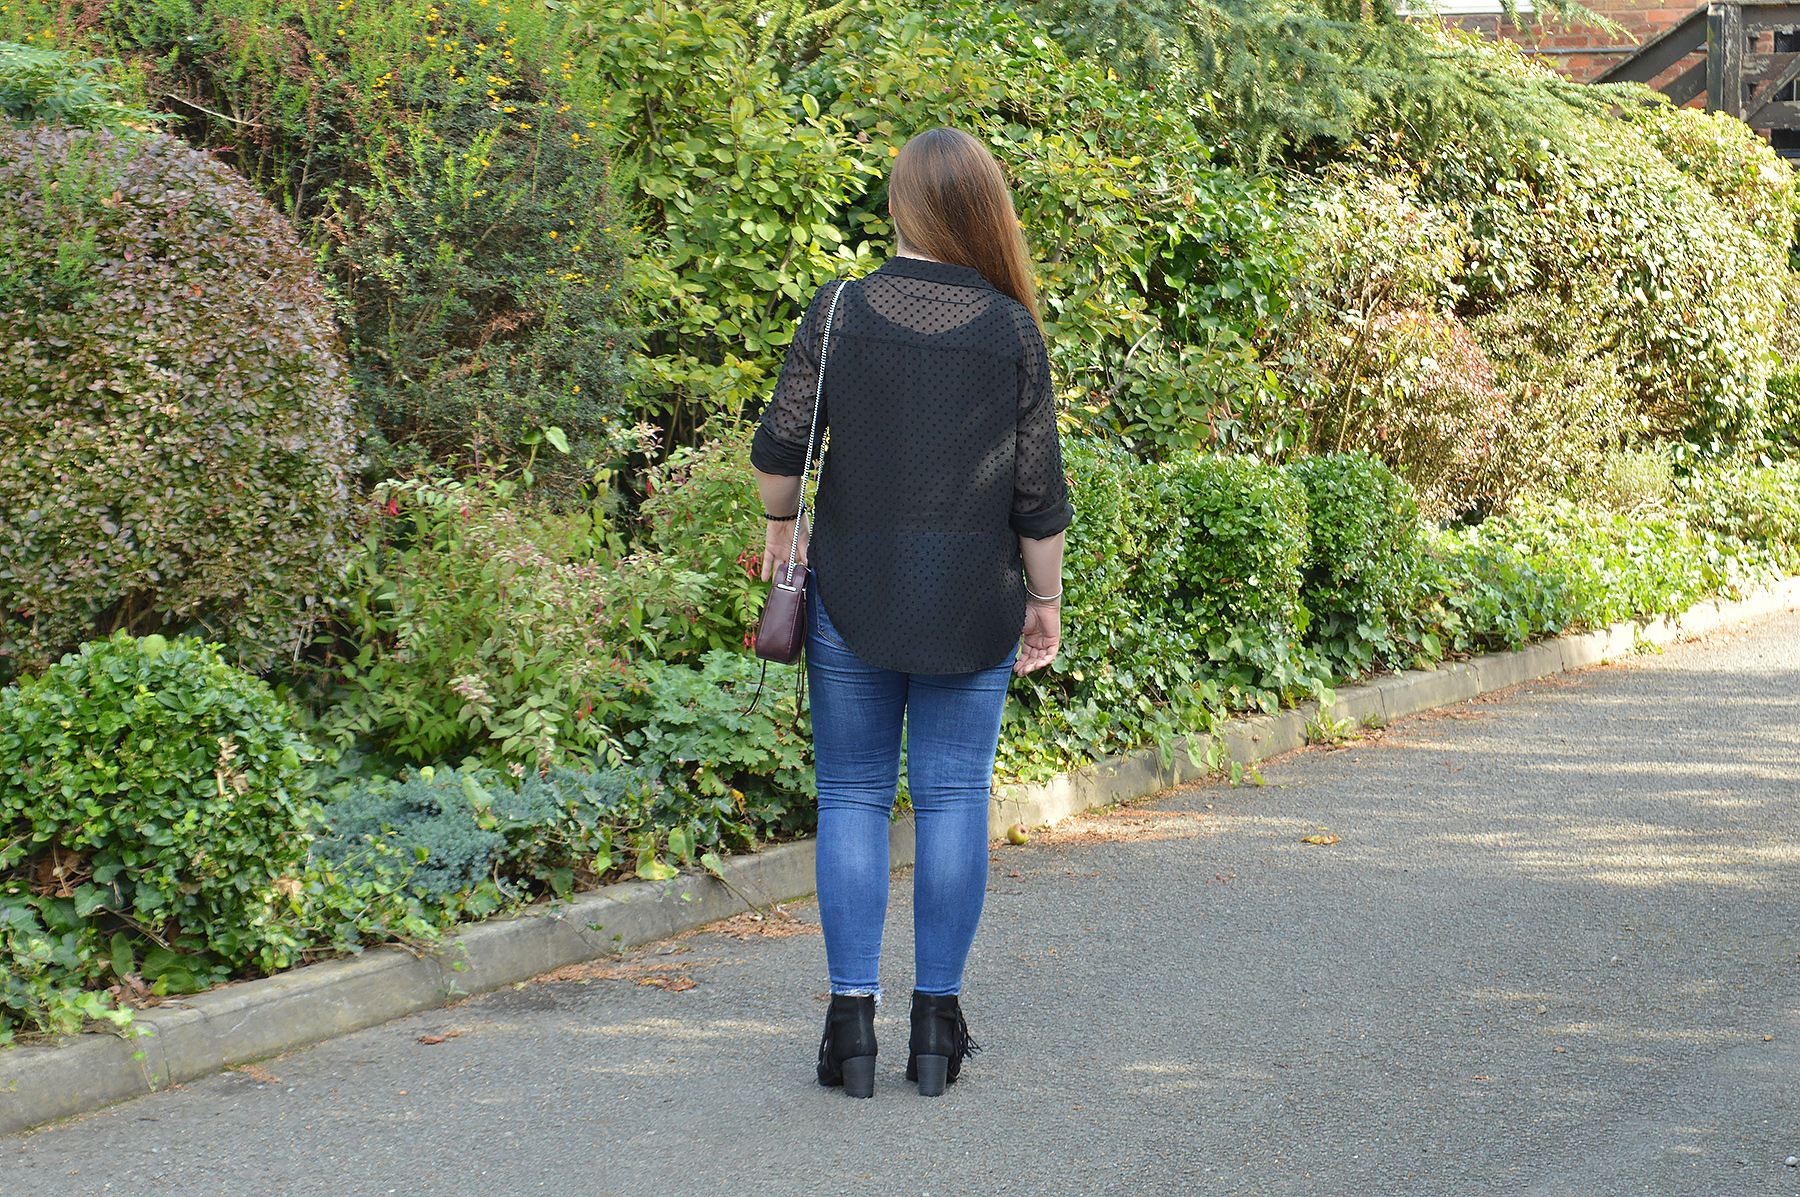 Zara black and blue outfit 